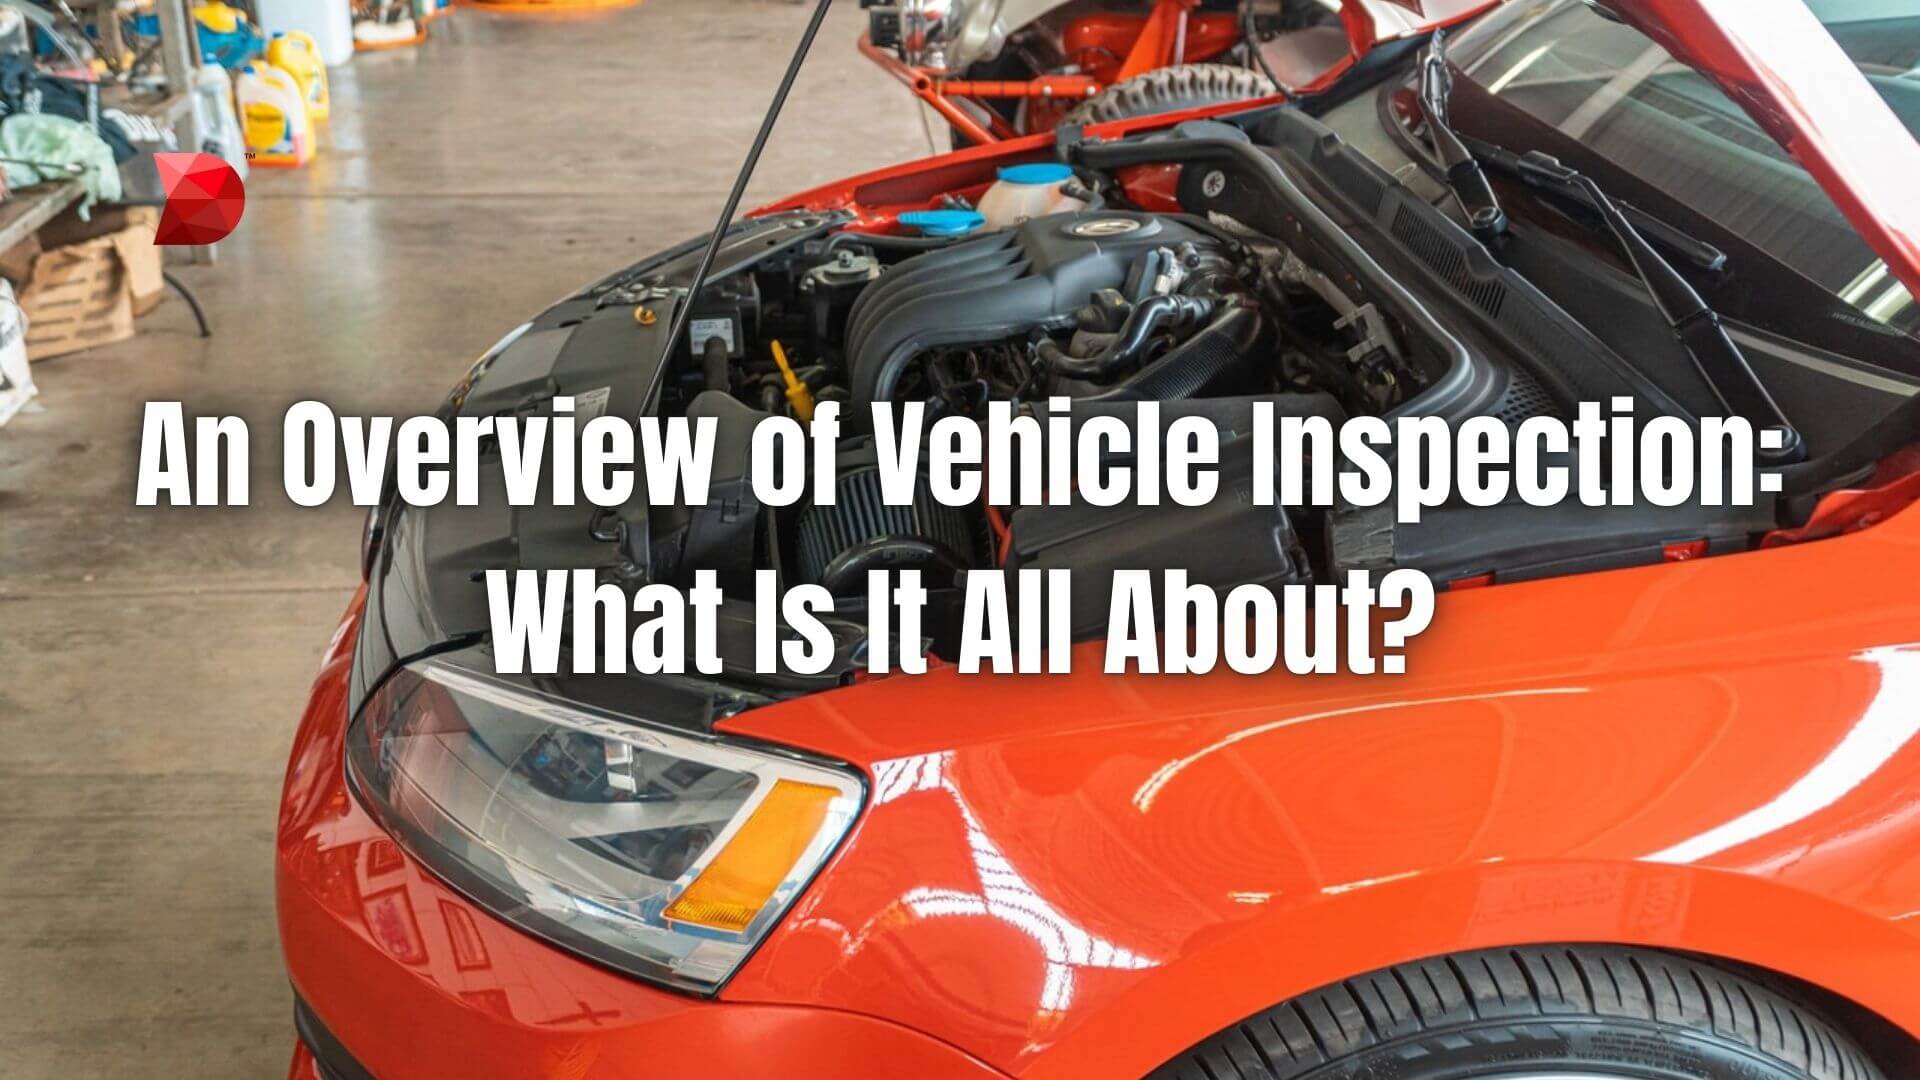 An Overview of Vehicle Inspection What Is It All About